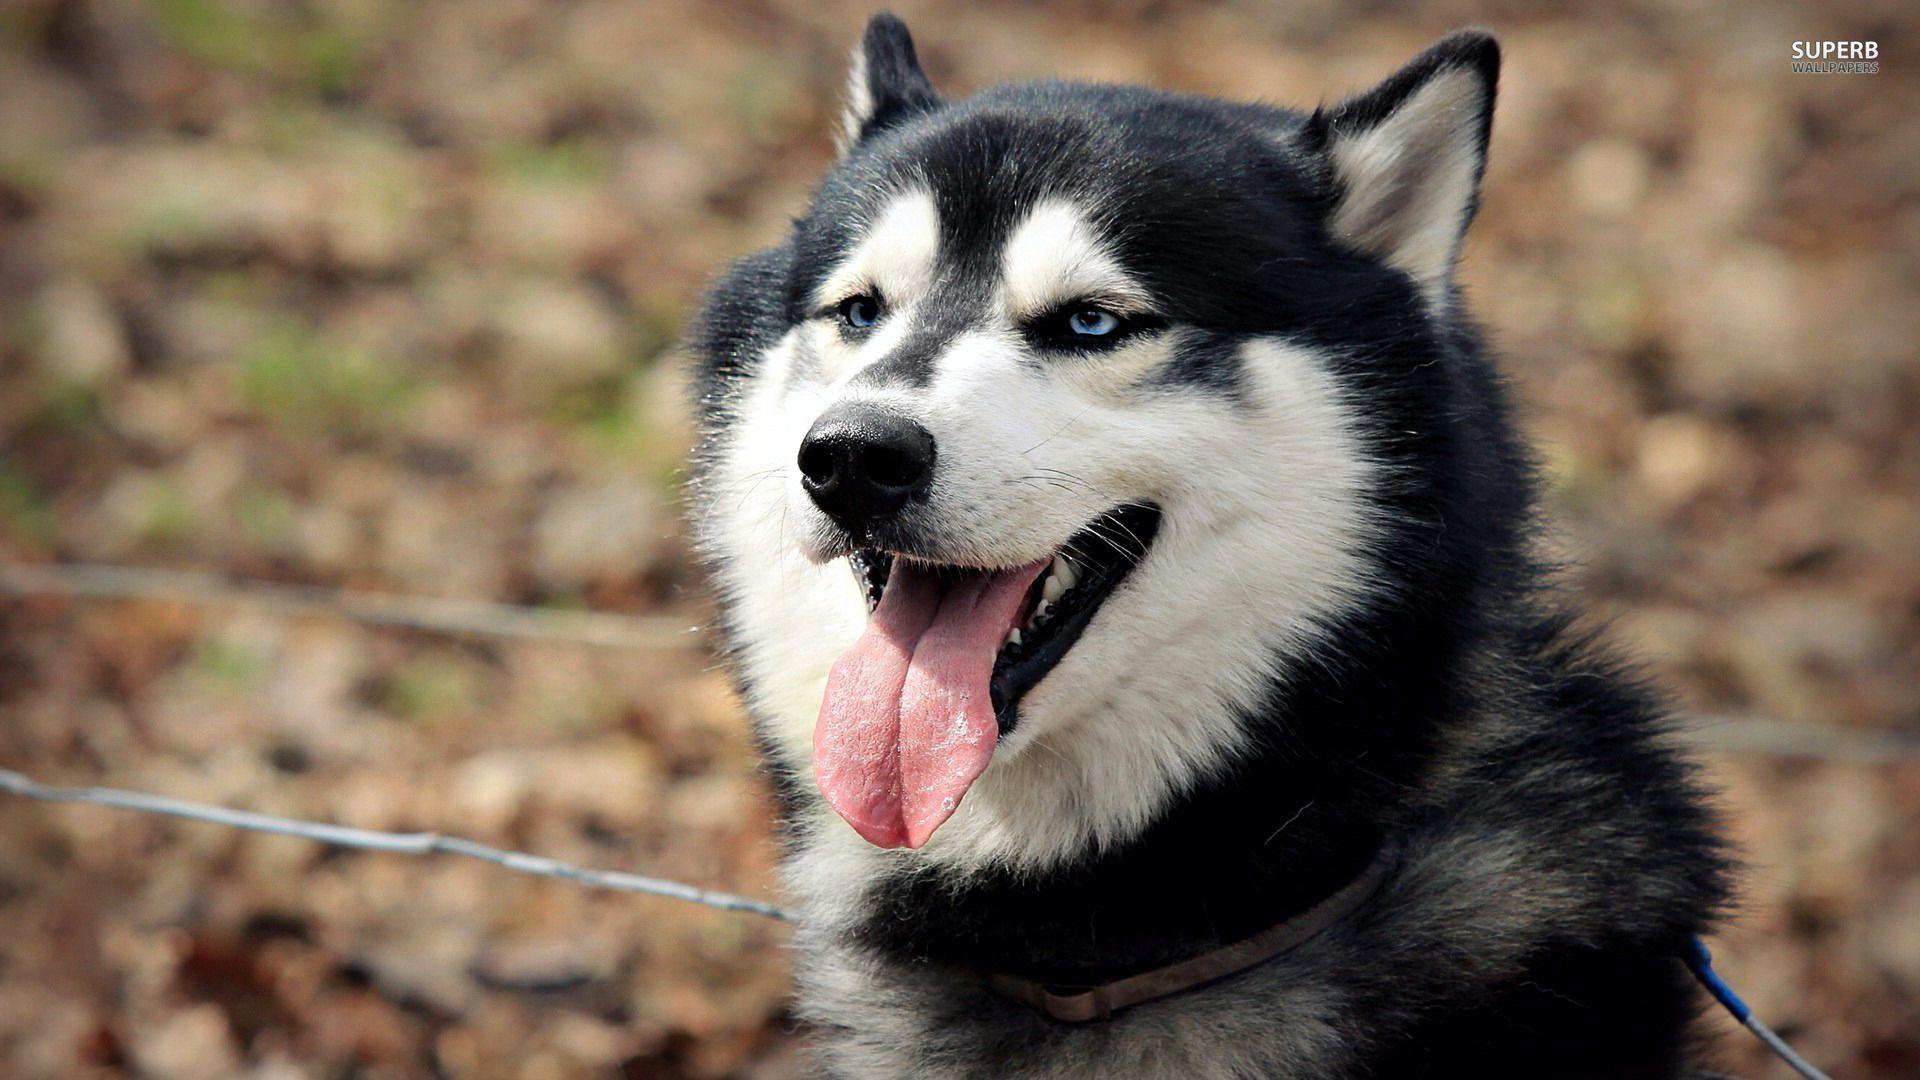 Siberian Husky Wallpaper High Resolution and Quality Download